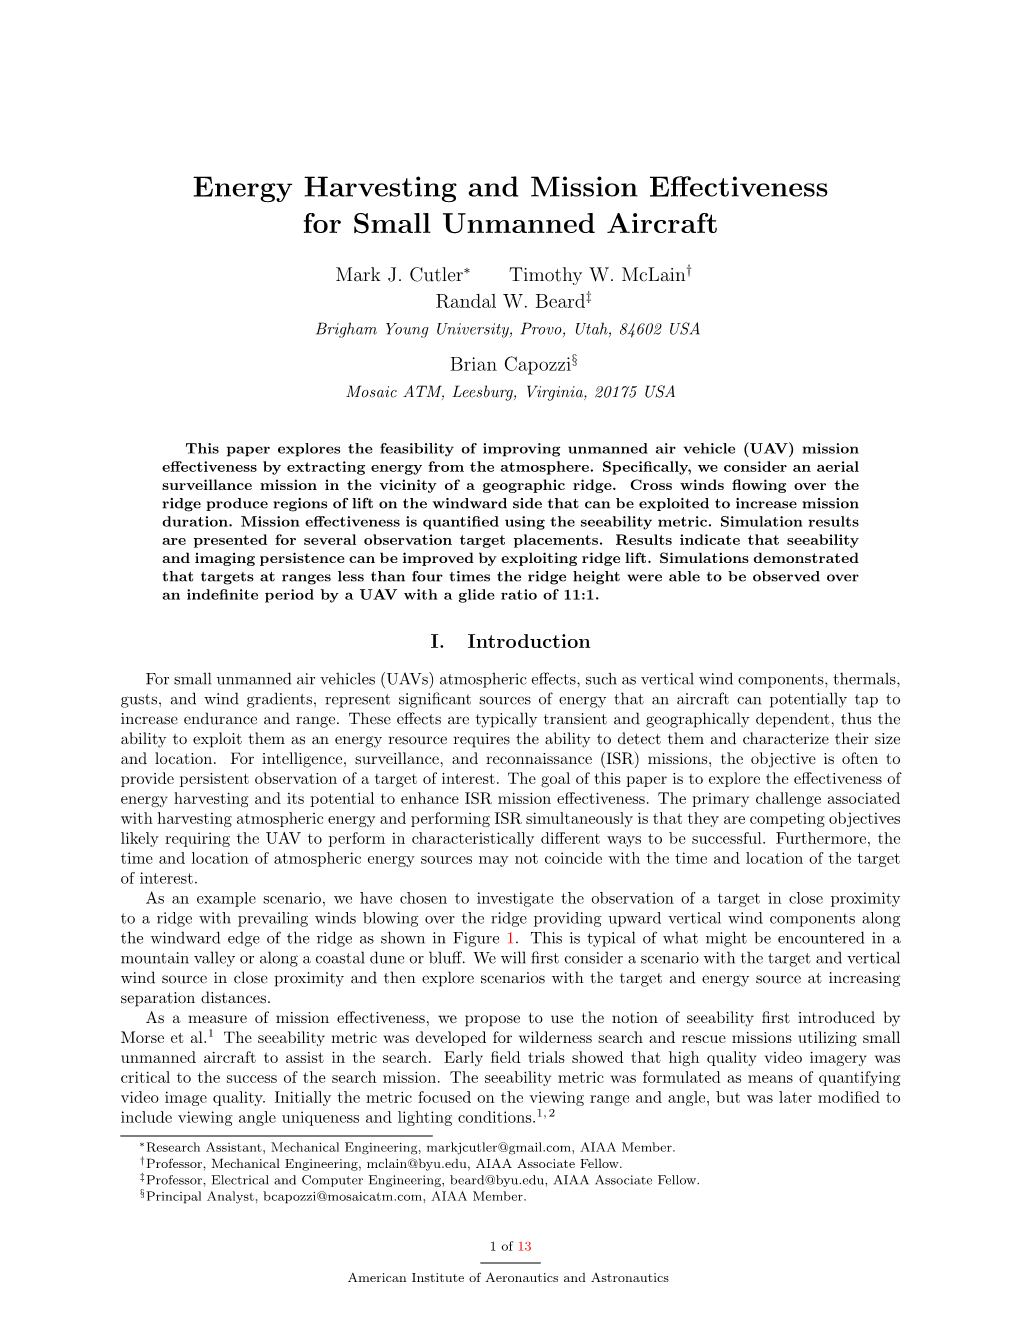 Energy Harvesting and Mission Effectiveness for Small Unmanned Aircraft